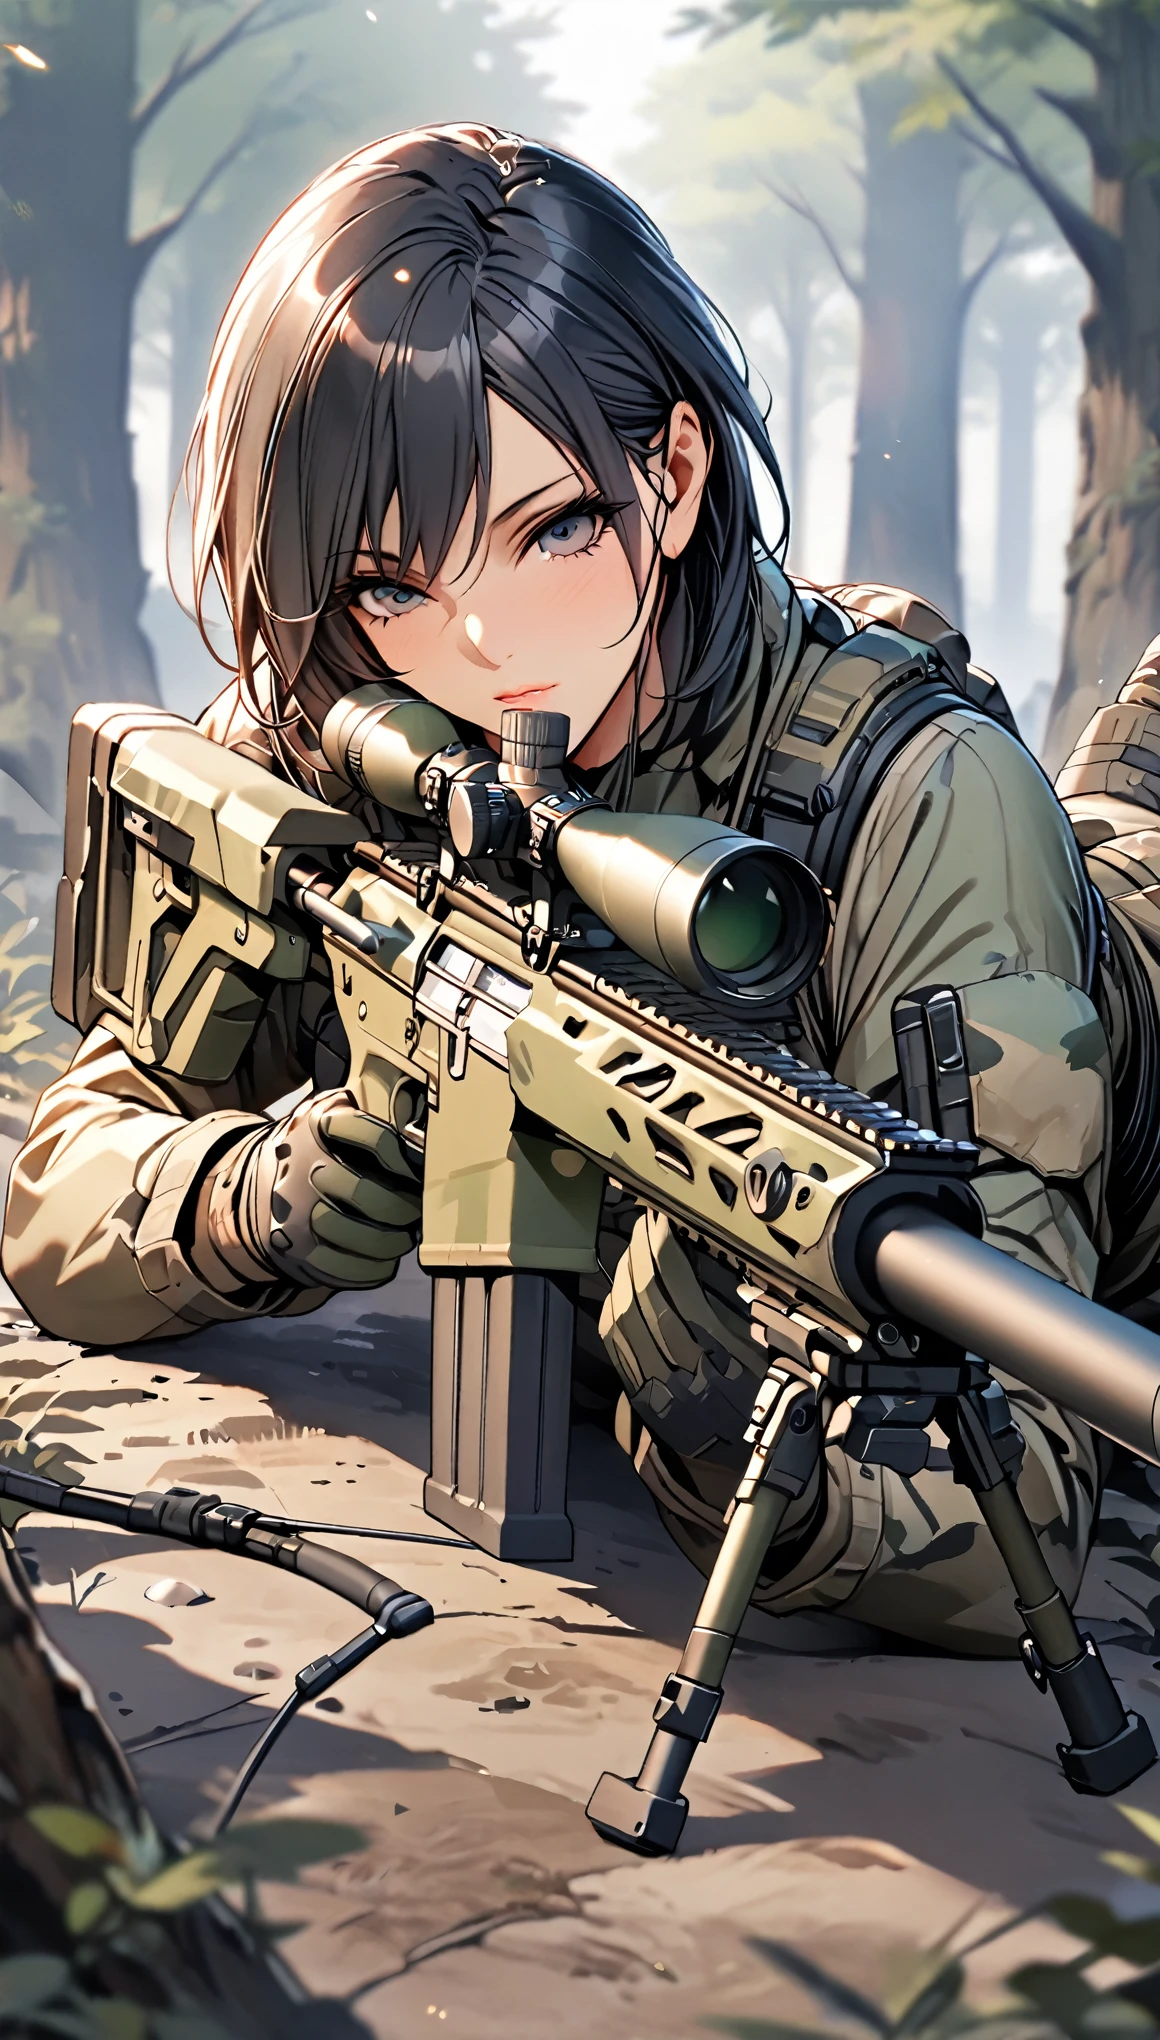 (masterpiece),(Highest quality),(High resolution),(Very detailed),One Woman,48 years old,Mature Woman,Japanese,Black Hair,Short Bob,Beautiful Eyes,Long eyelashes,Beautiful Hair,Beautiful Skin,strict,whole body,break(((aim at something with a sniper rifle))),((View the sights))(Lying down),((Sniper Rifle)),Army Camouflage Uniform,Bulletproof vest, Combat Boots, Tactical Forster,Tactical Headset,(The background is a dense forest),(((Background Blur)))